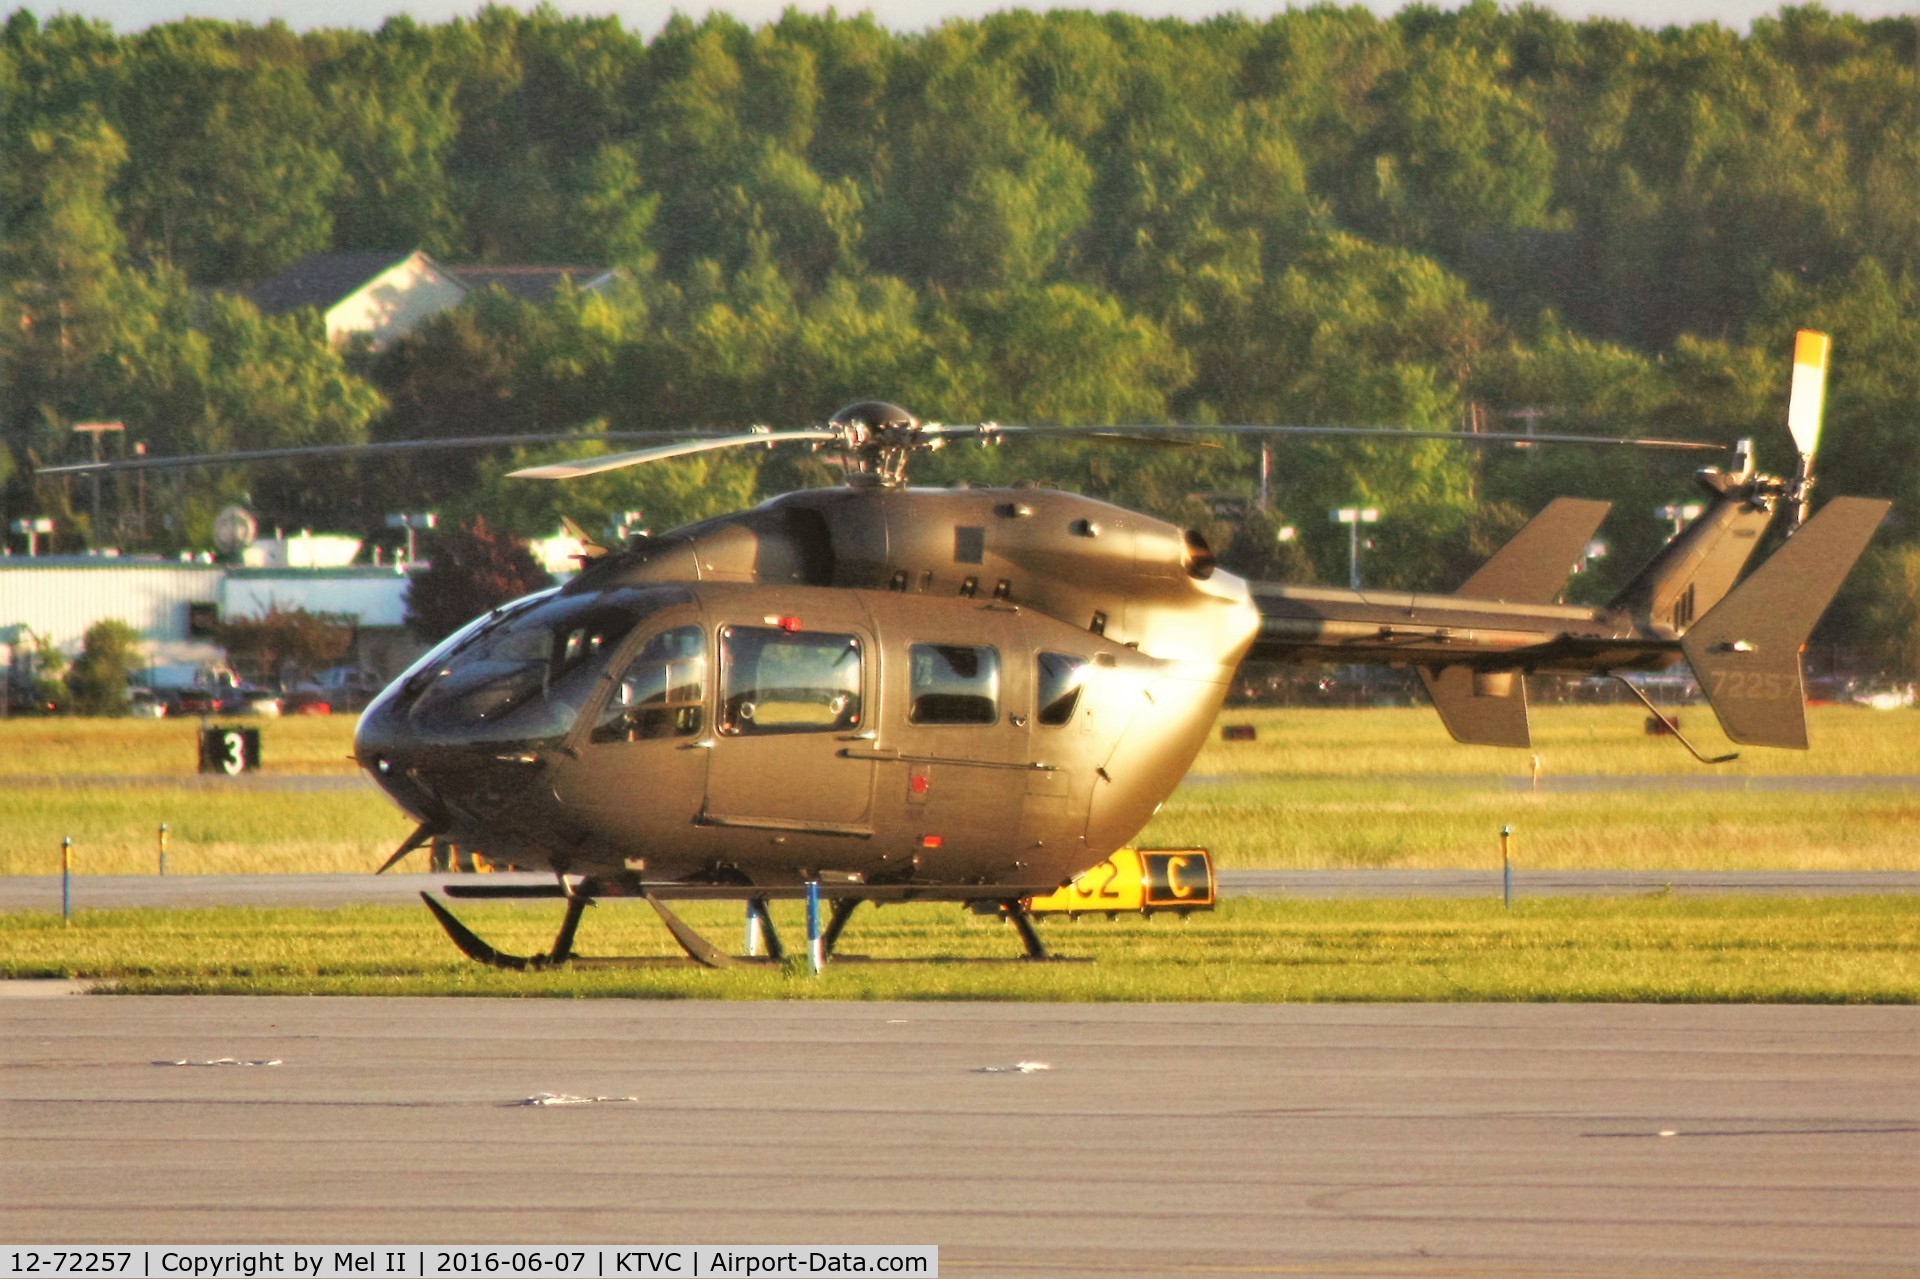 12-72257, 2012 Eurocopter UH-72A Lakota C/N Not Found 12-72257, Parked